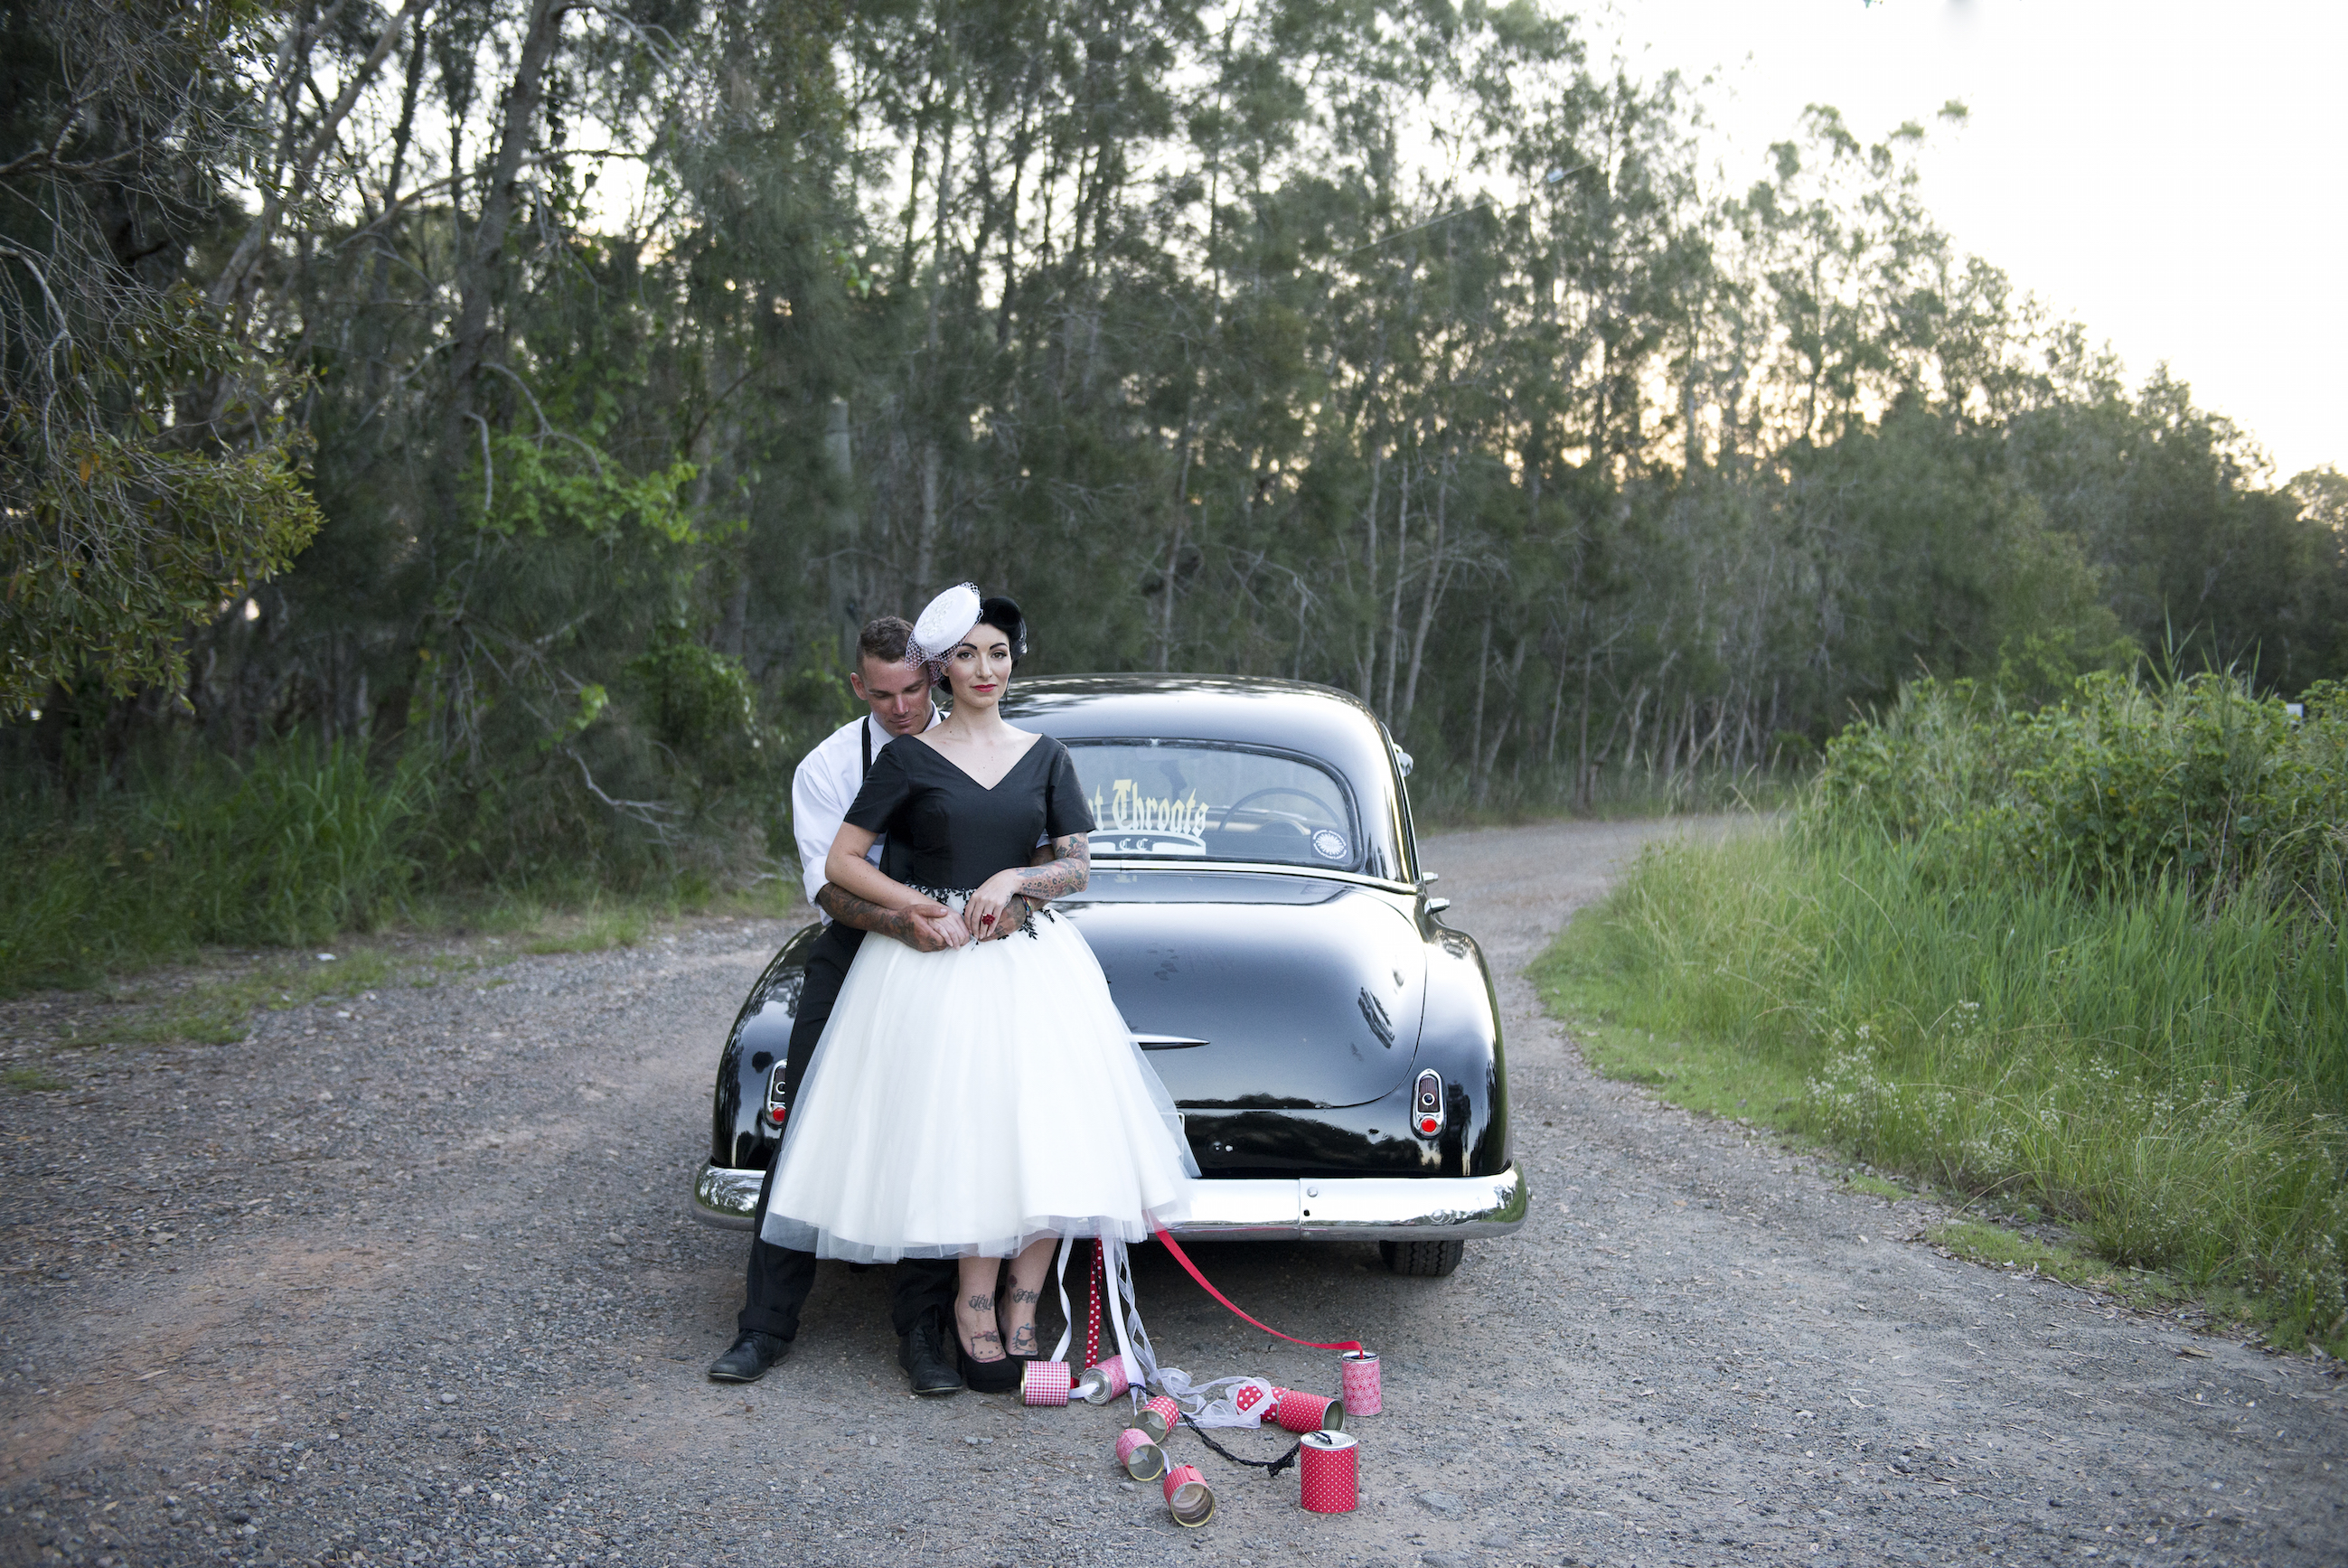 Vintage fashion inspired Bride and Groom